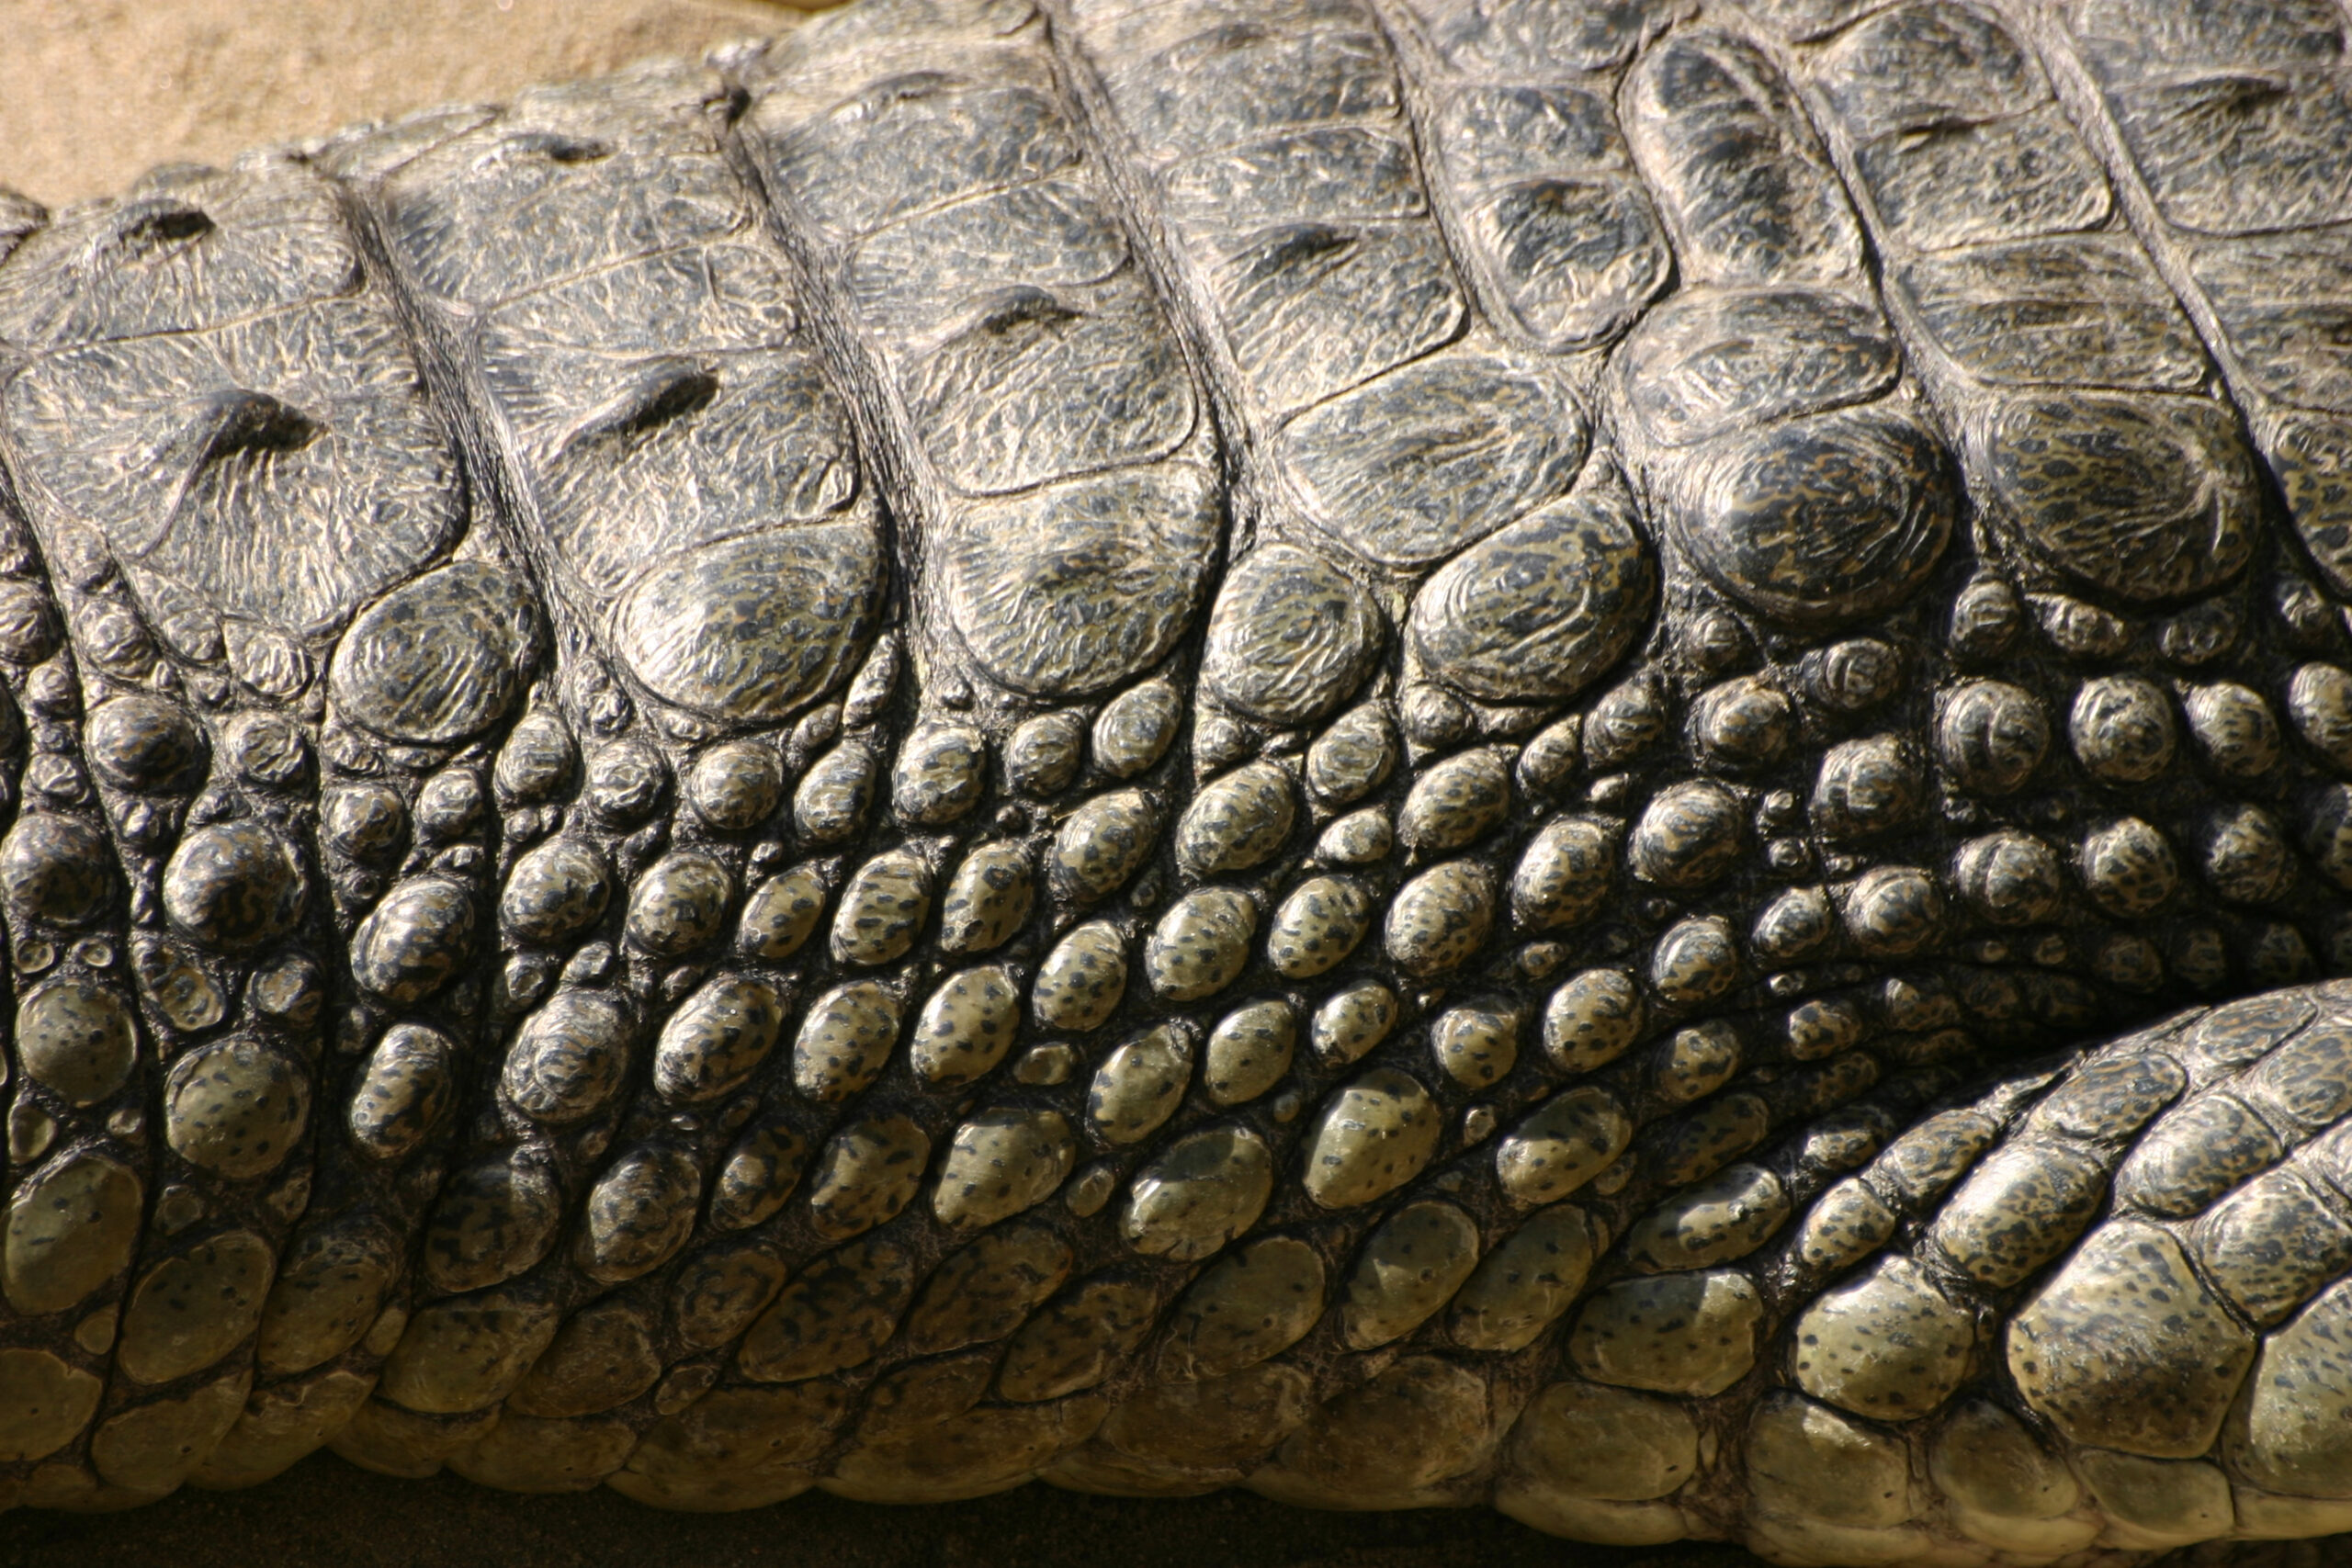 Despite their thick skins, alligators and crocodiles are surprisingly  touchy